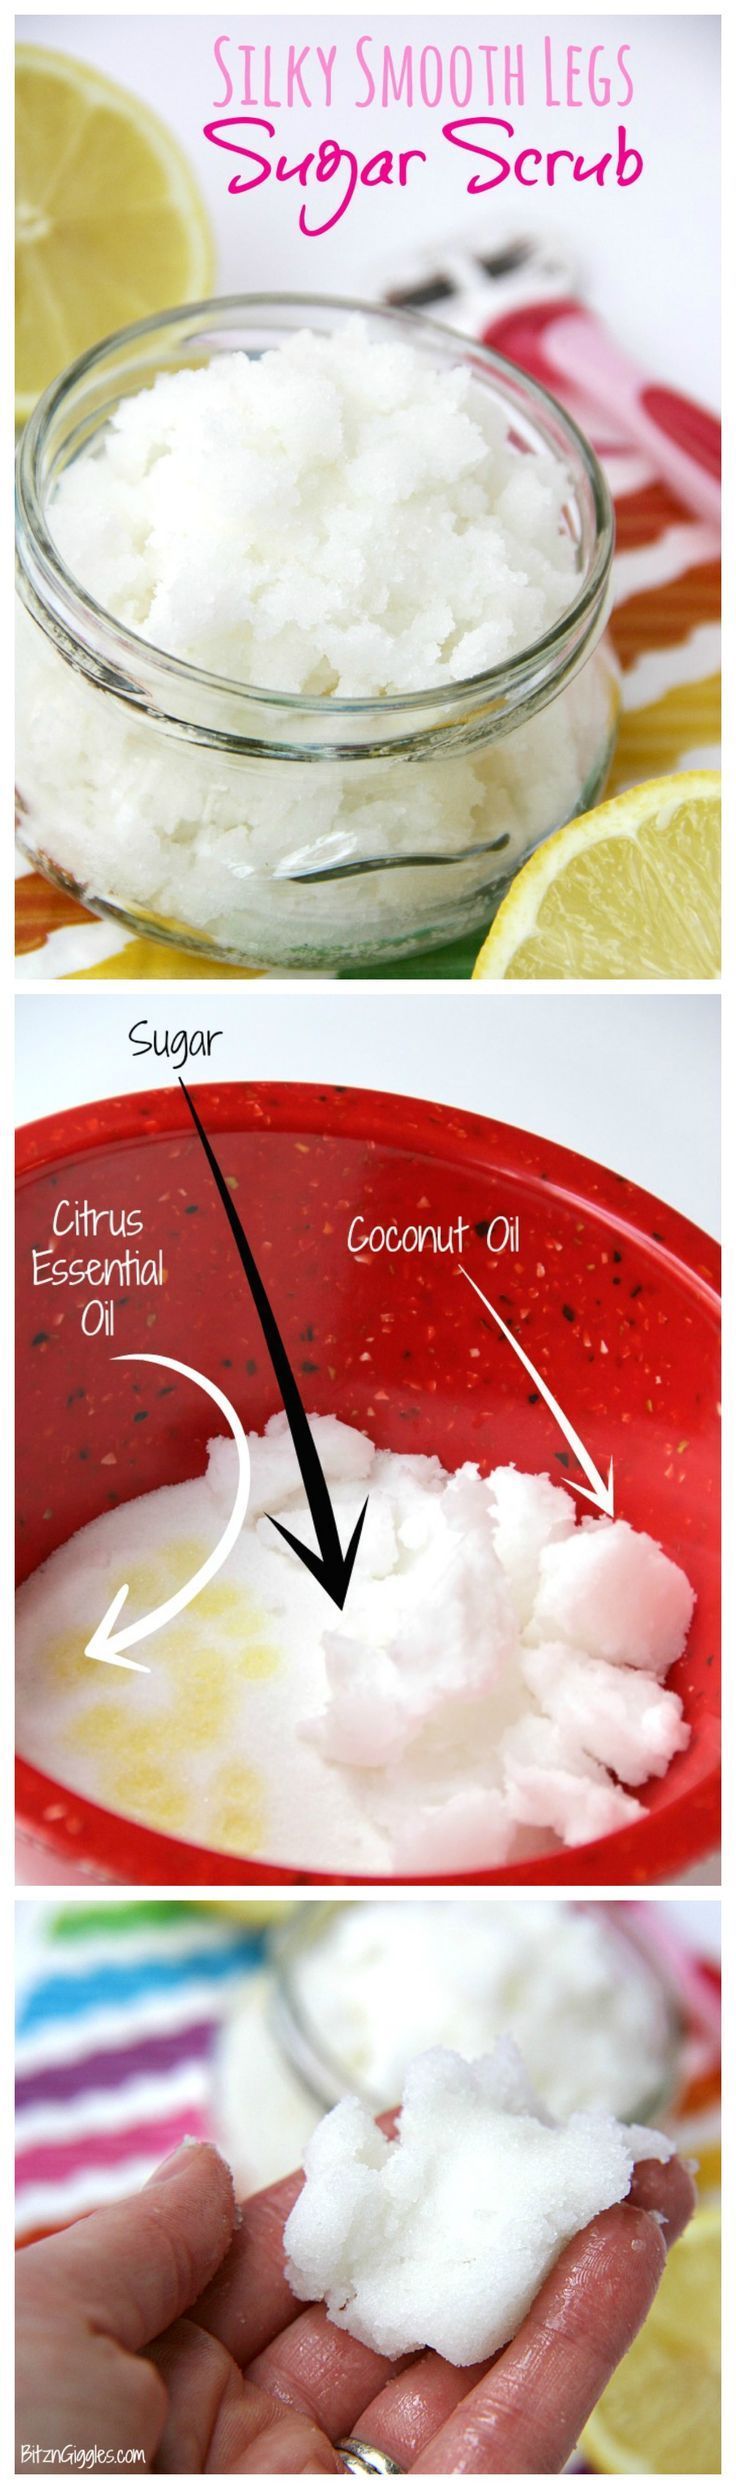 Silky Smooth Legs Sugar Scrub – Apply a small amount of this scrub before shaving for silky, smooth legs year round!